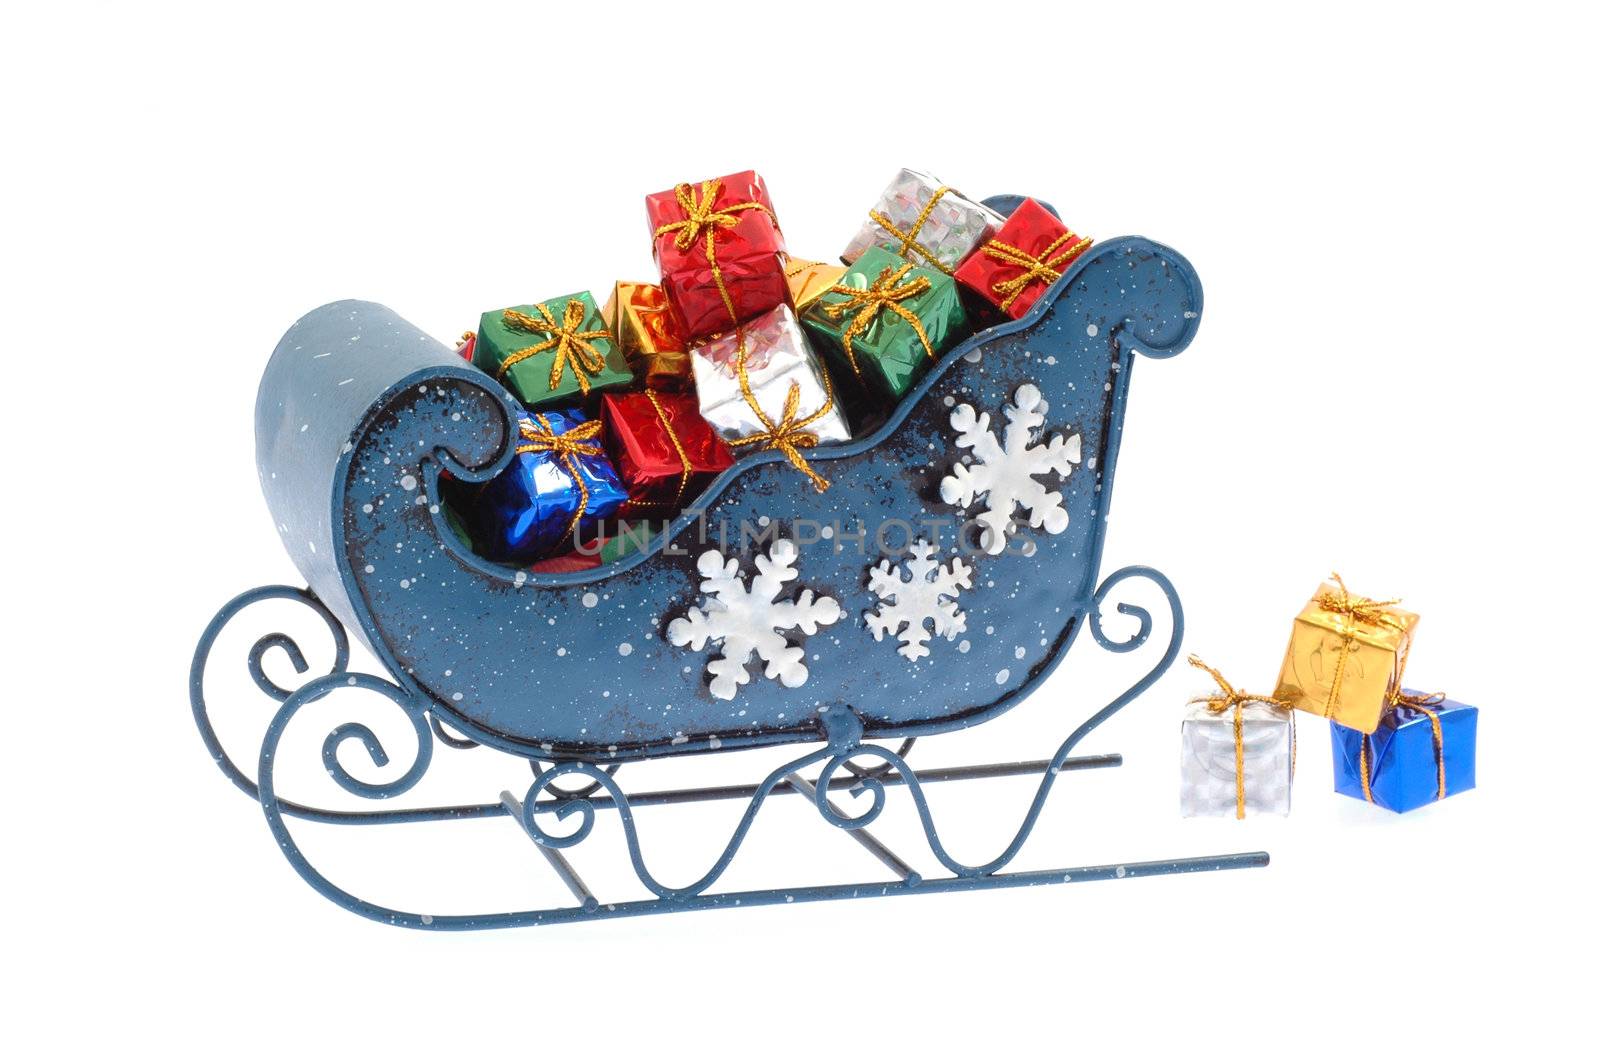 Blue sleigh filled with many colorful presents.